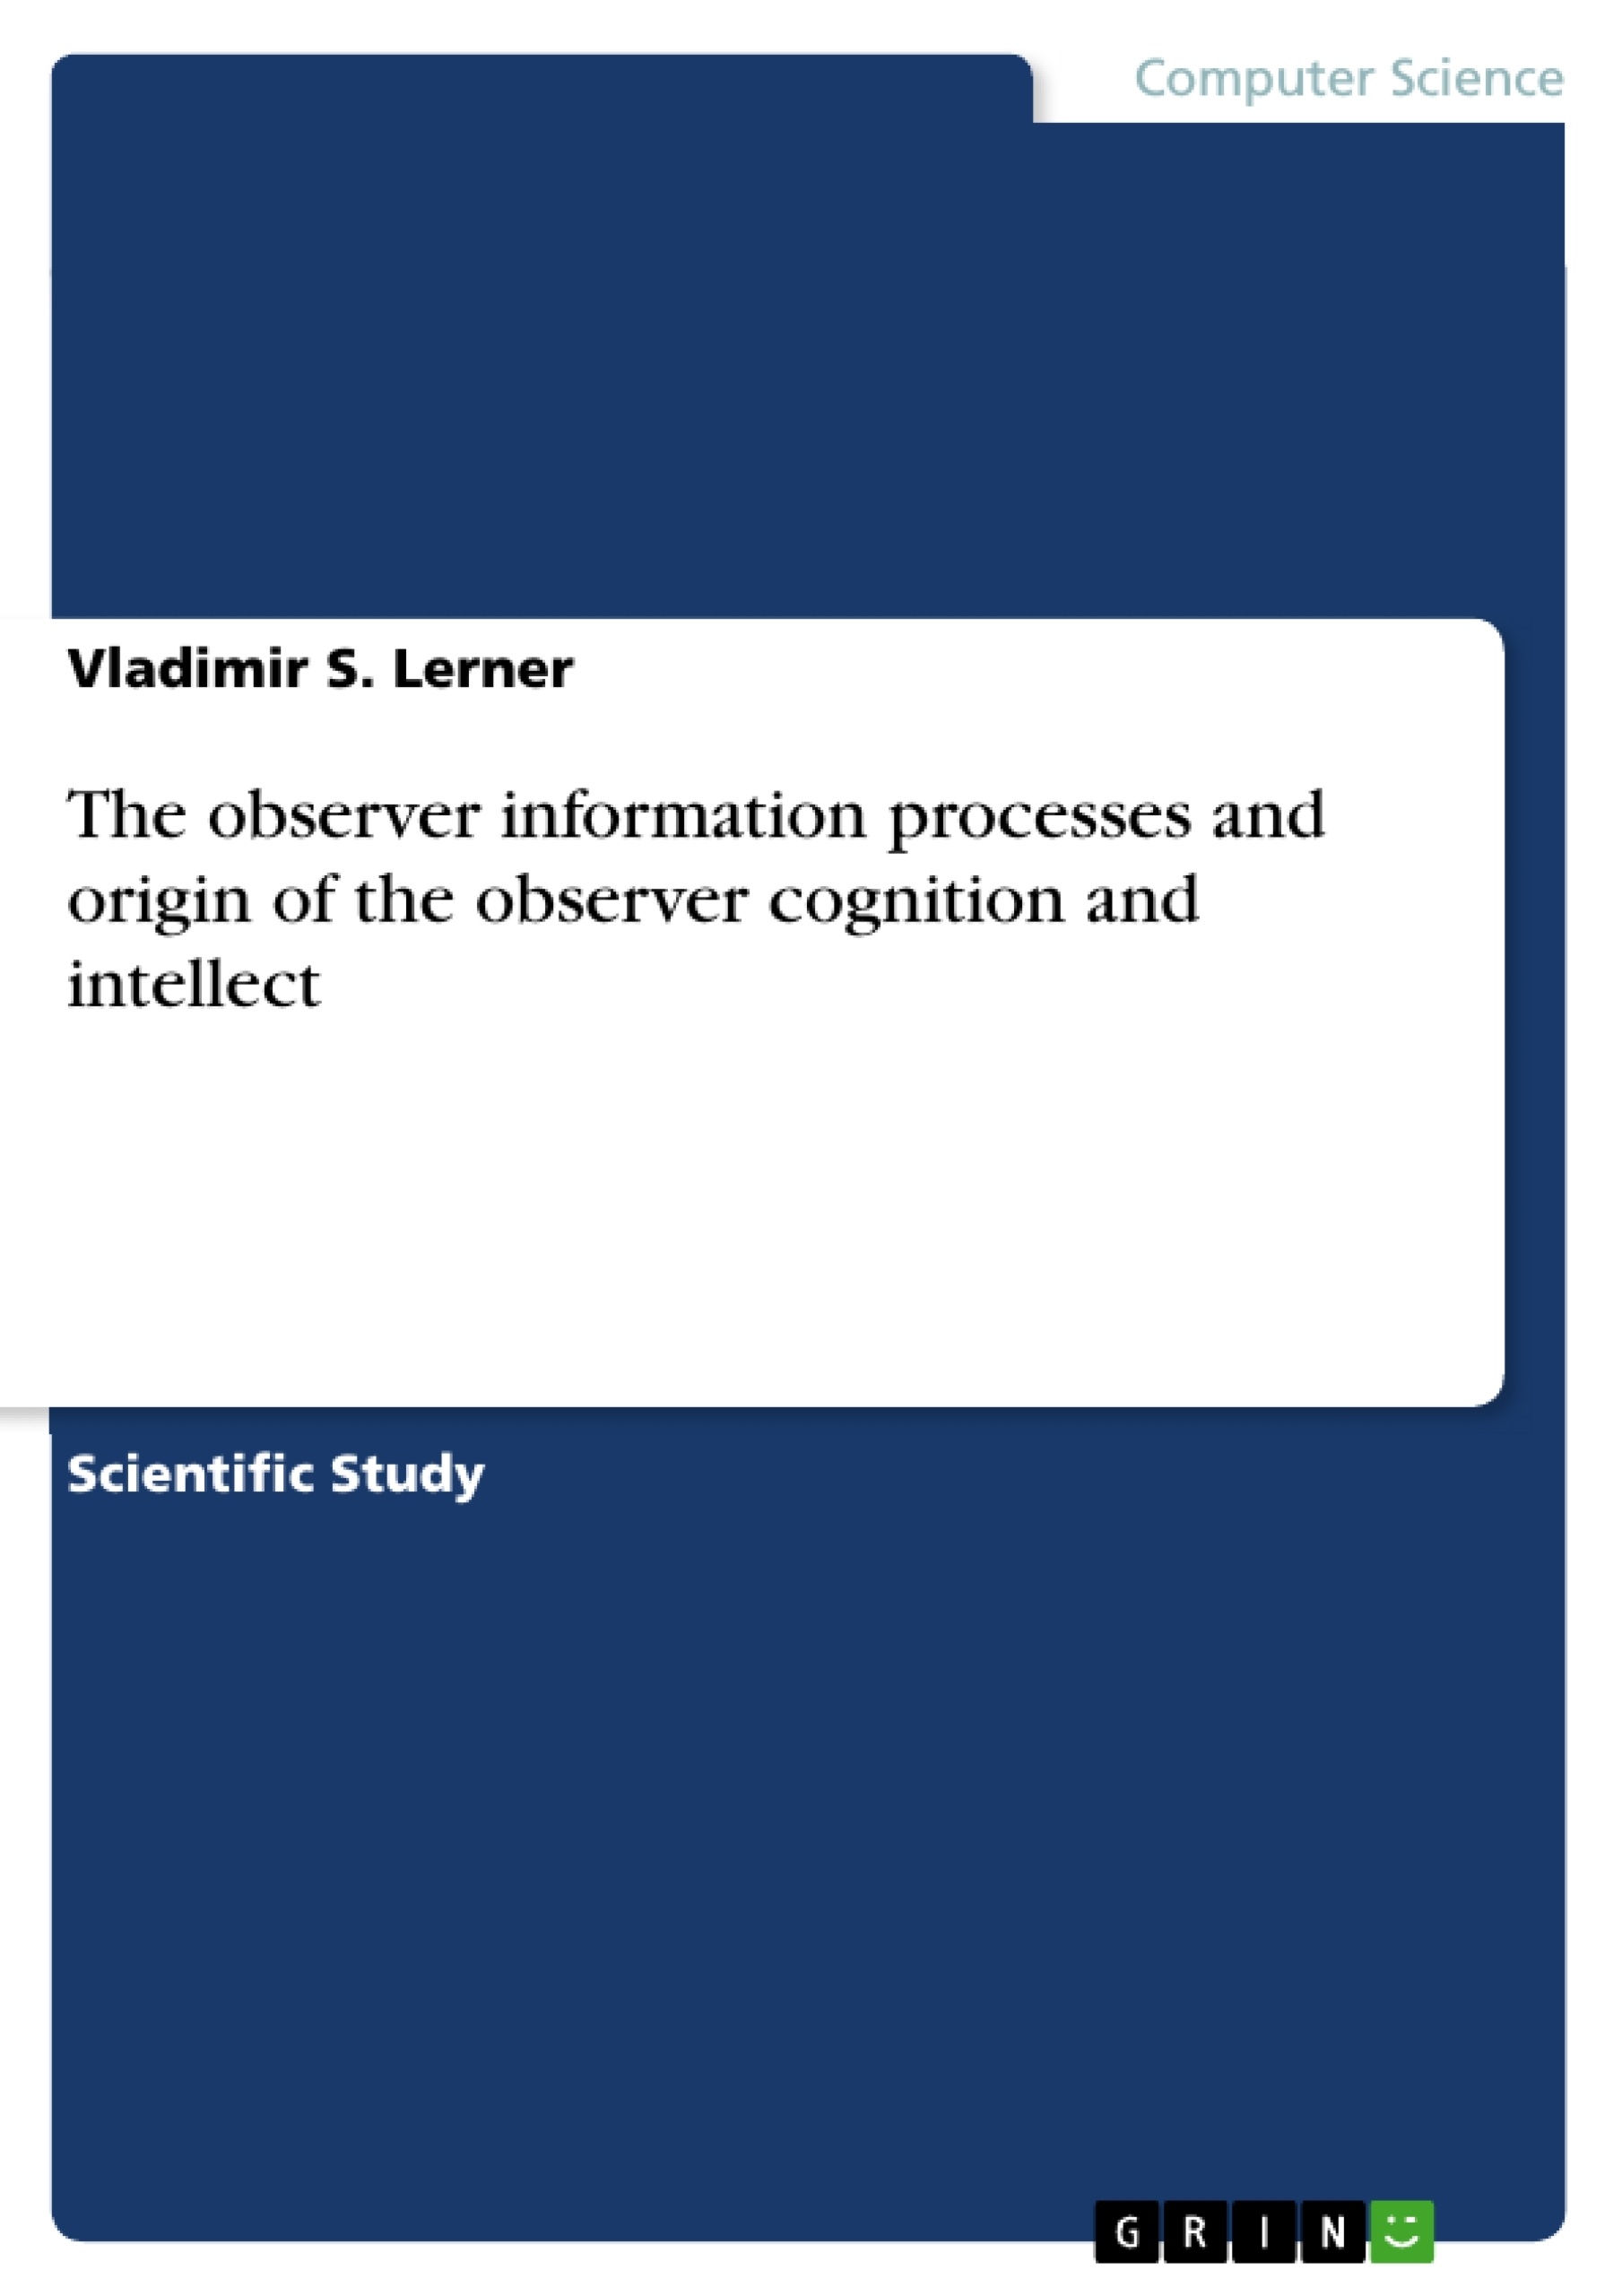 cognition　and　The　observer　of　observer　processes　intellect　origin　information　and　the　GRIN